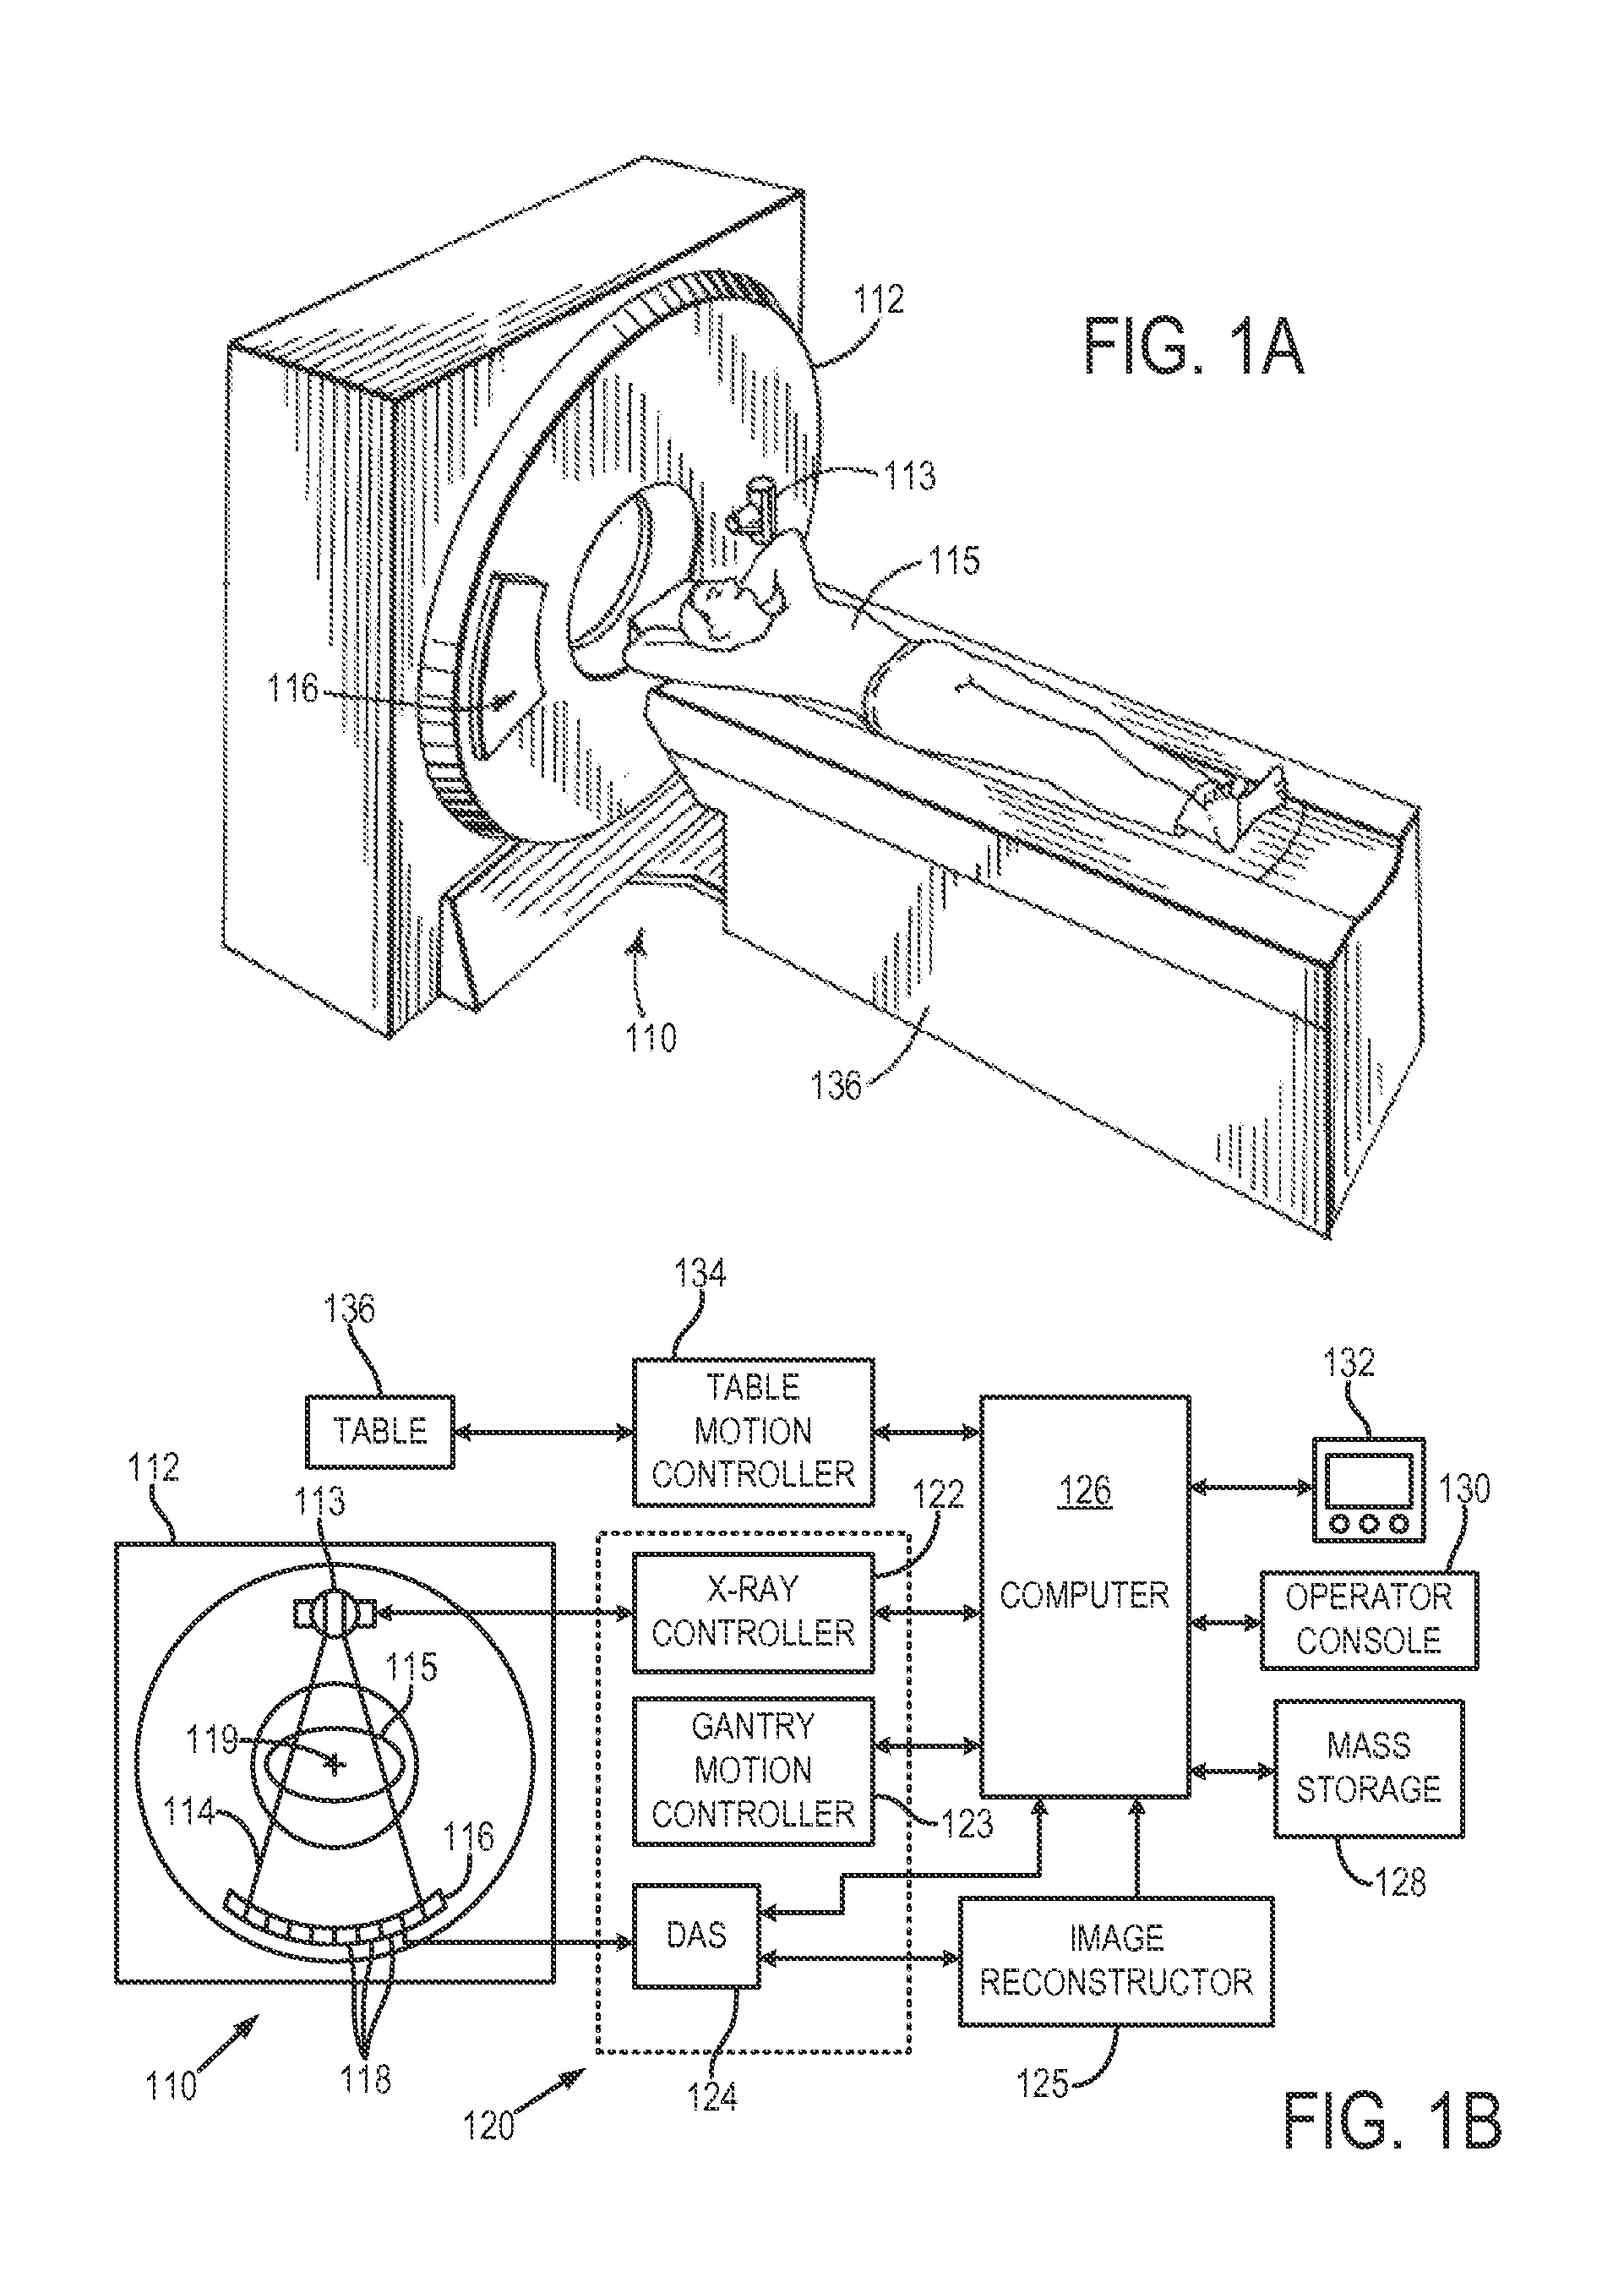 System and Method for Denoising Medical Images Adaptive to Local Noise